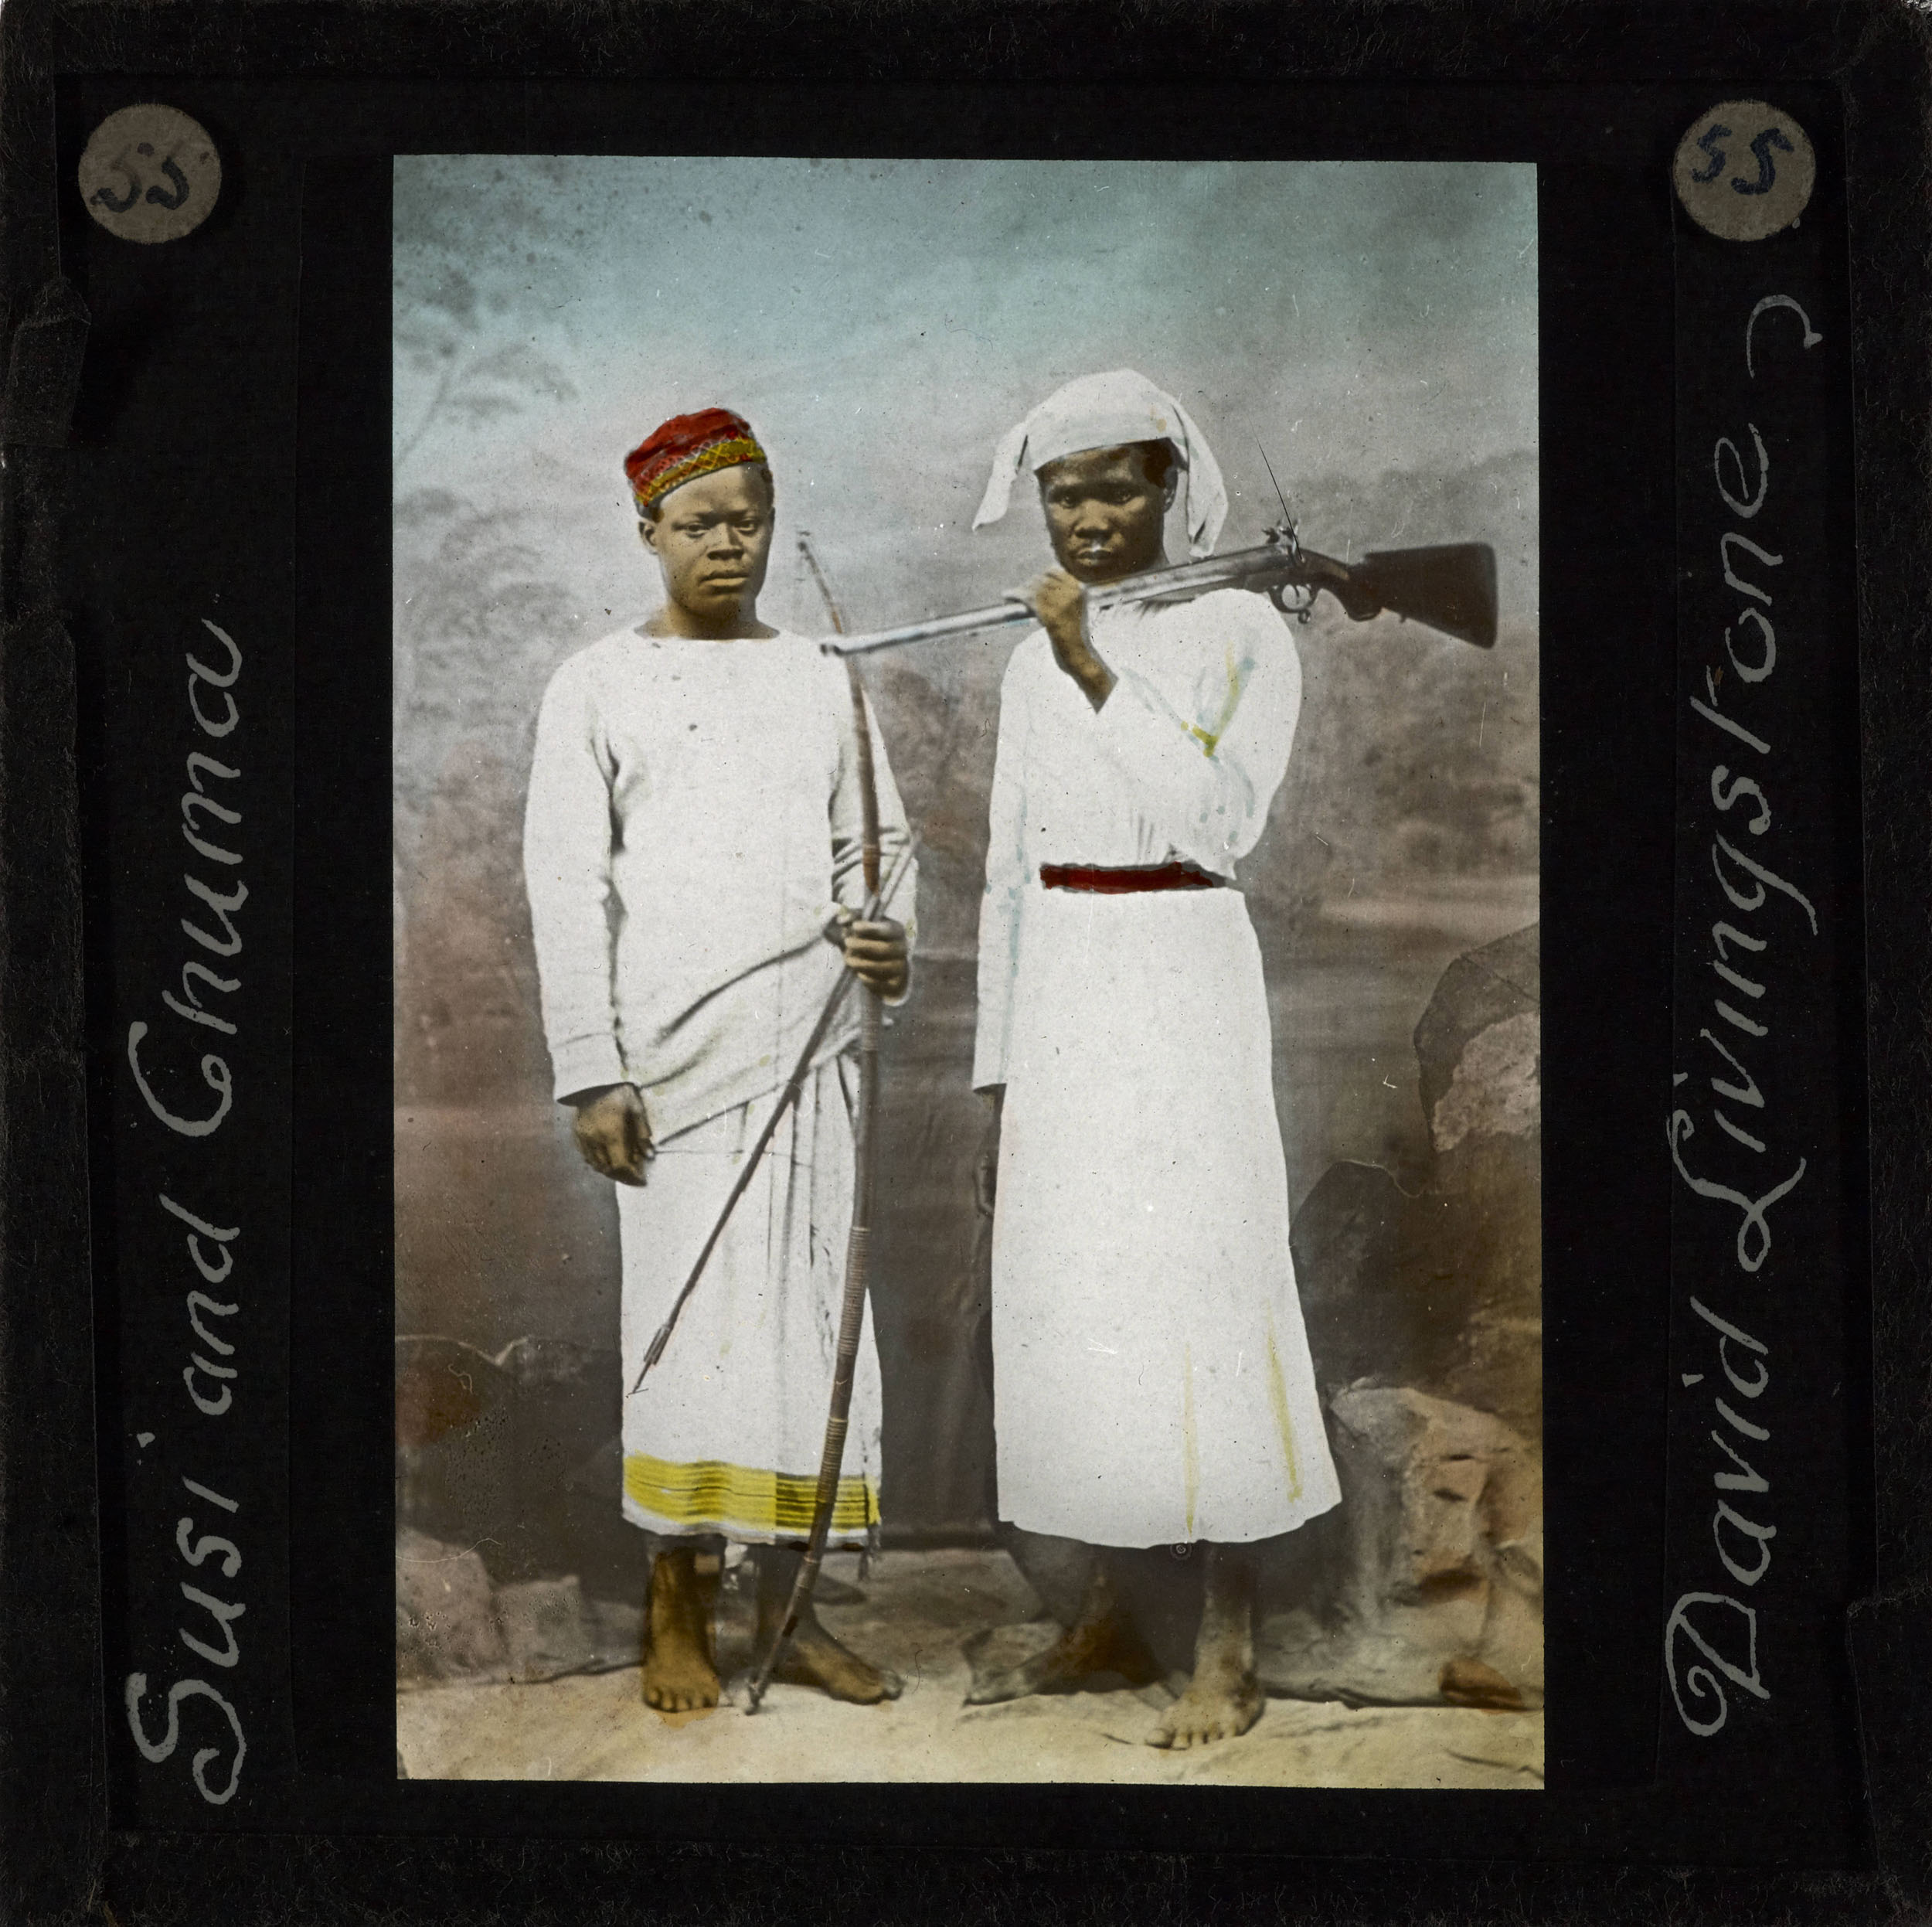 Painted Lantern Slide of Susi and Chuma, Date Unknown (after 1873). Copyright The Centre for the Study of World Christianity, University of Edinburgh. Creative Commons Attribution-NonCommercial 3.0 Unported (https://creativecommons.org/licenses/by-nc/3.0/).